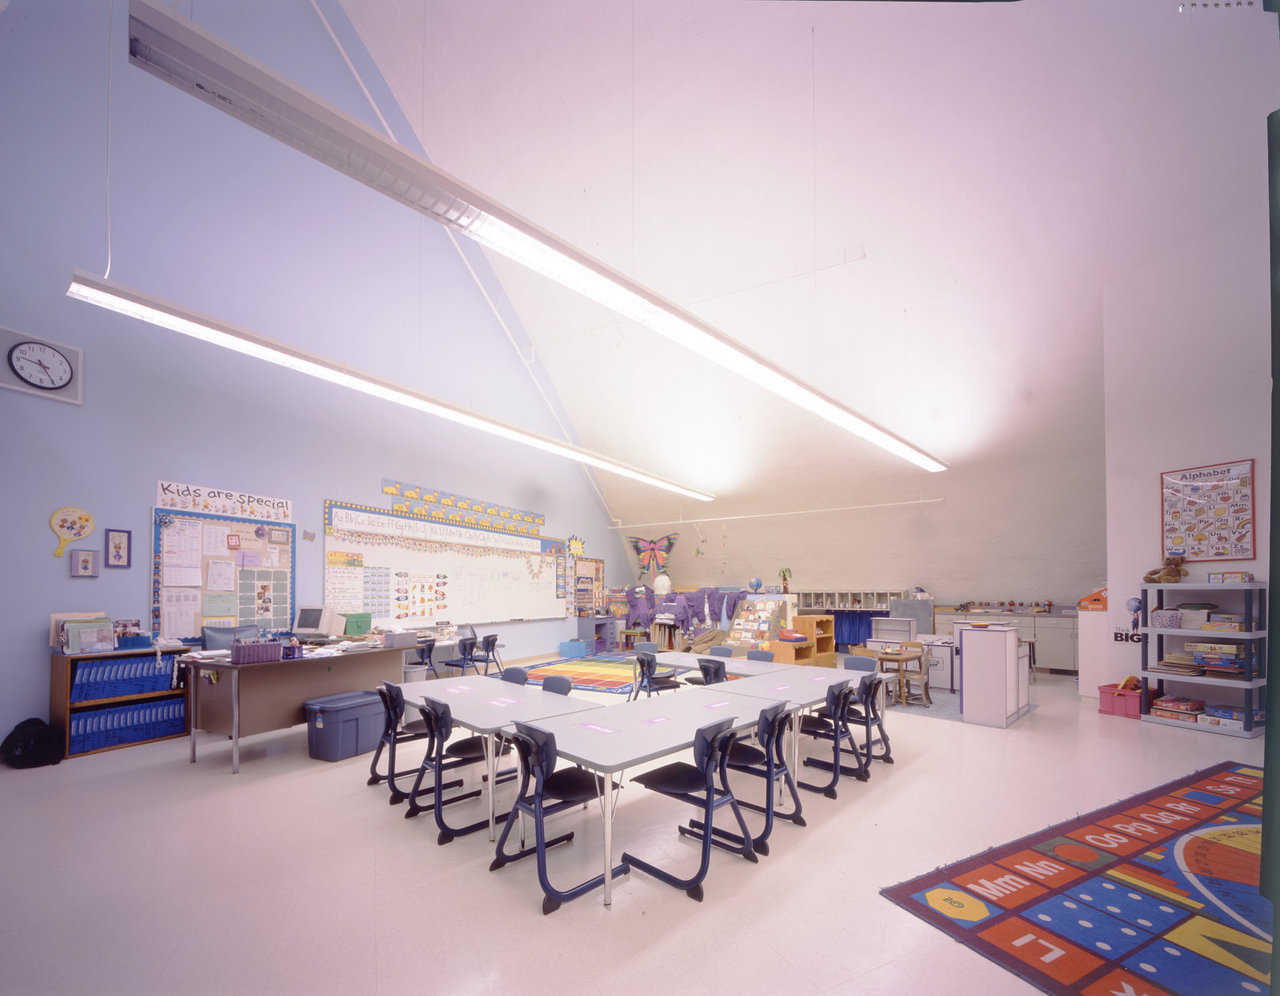 Feasibility Study — Architect Rick Crandall produced a feasibility study that illustrated the dome layout and enabled people to see how the school would function.